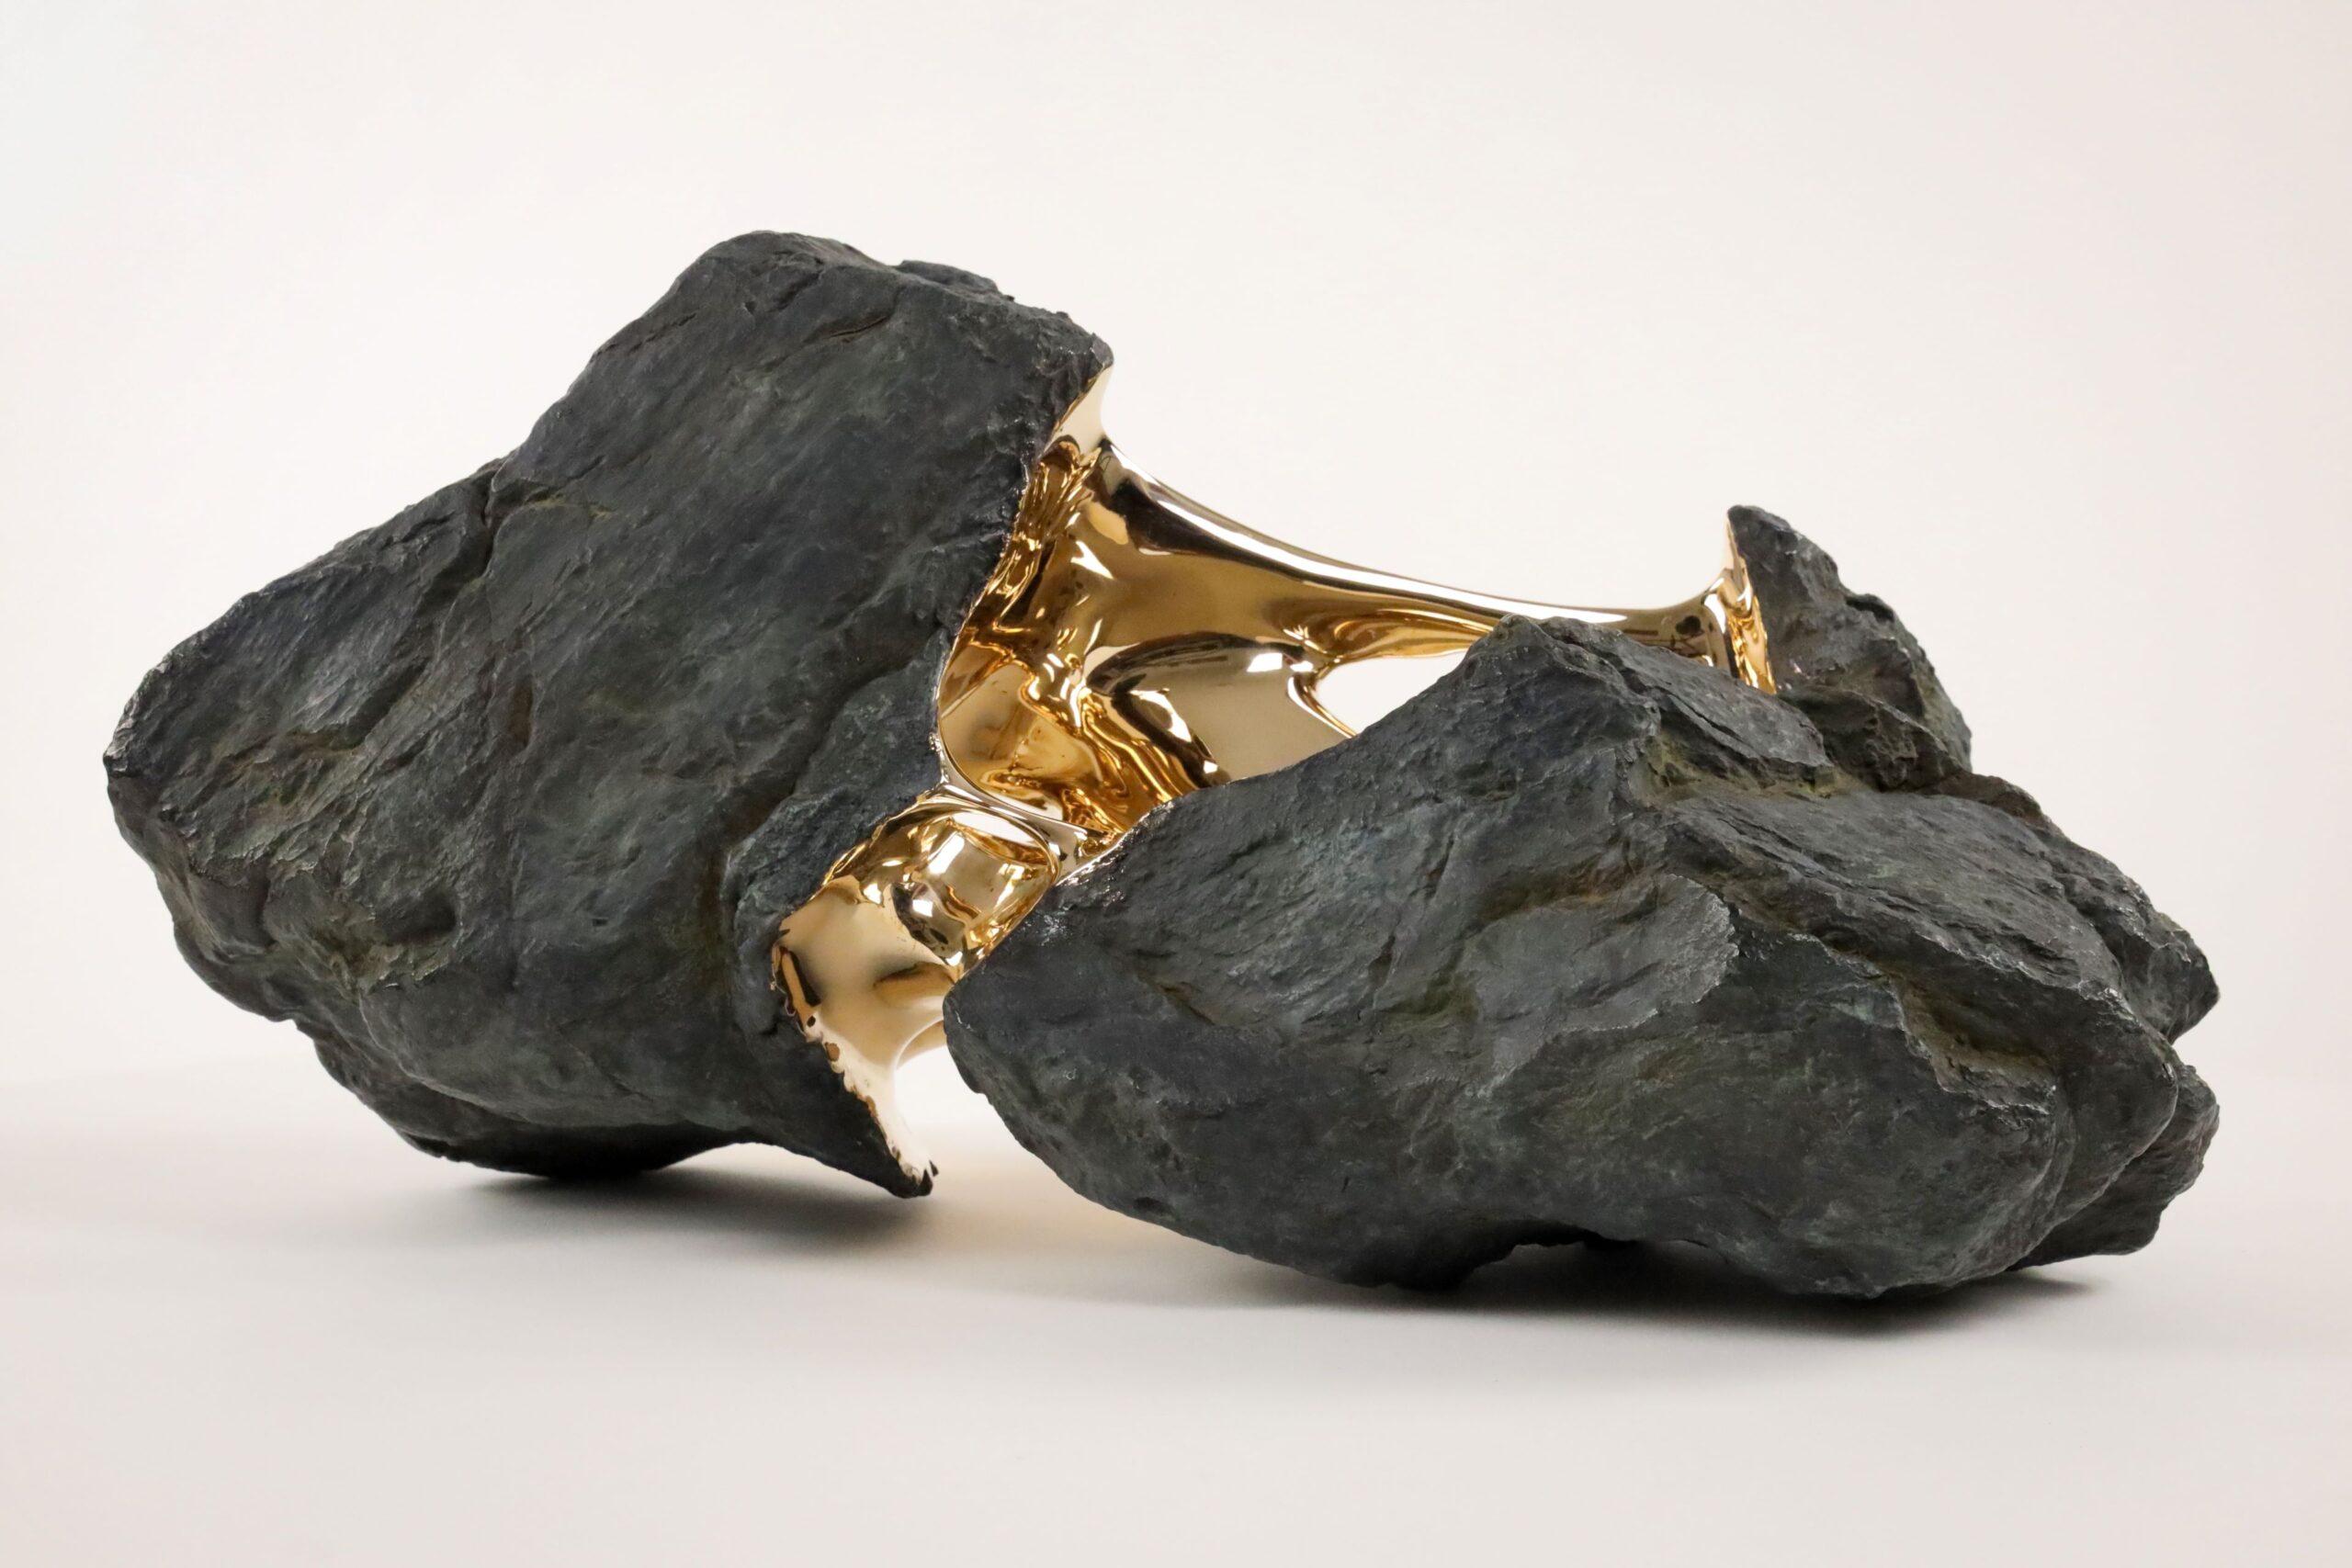 Kairos by Romain Langlois - Rock-like bronze sculpture, golden, abstract For Sale 12